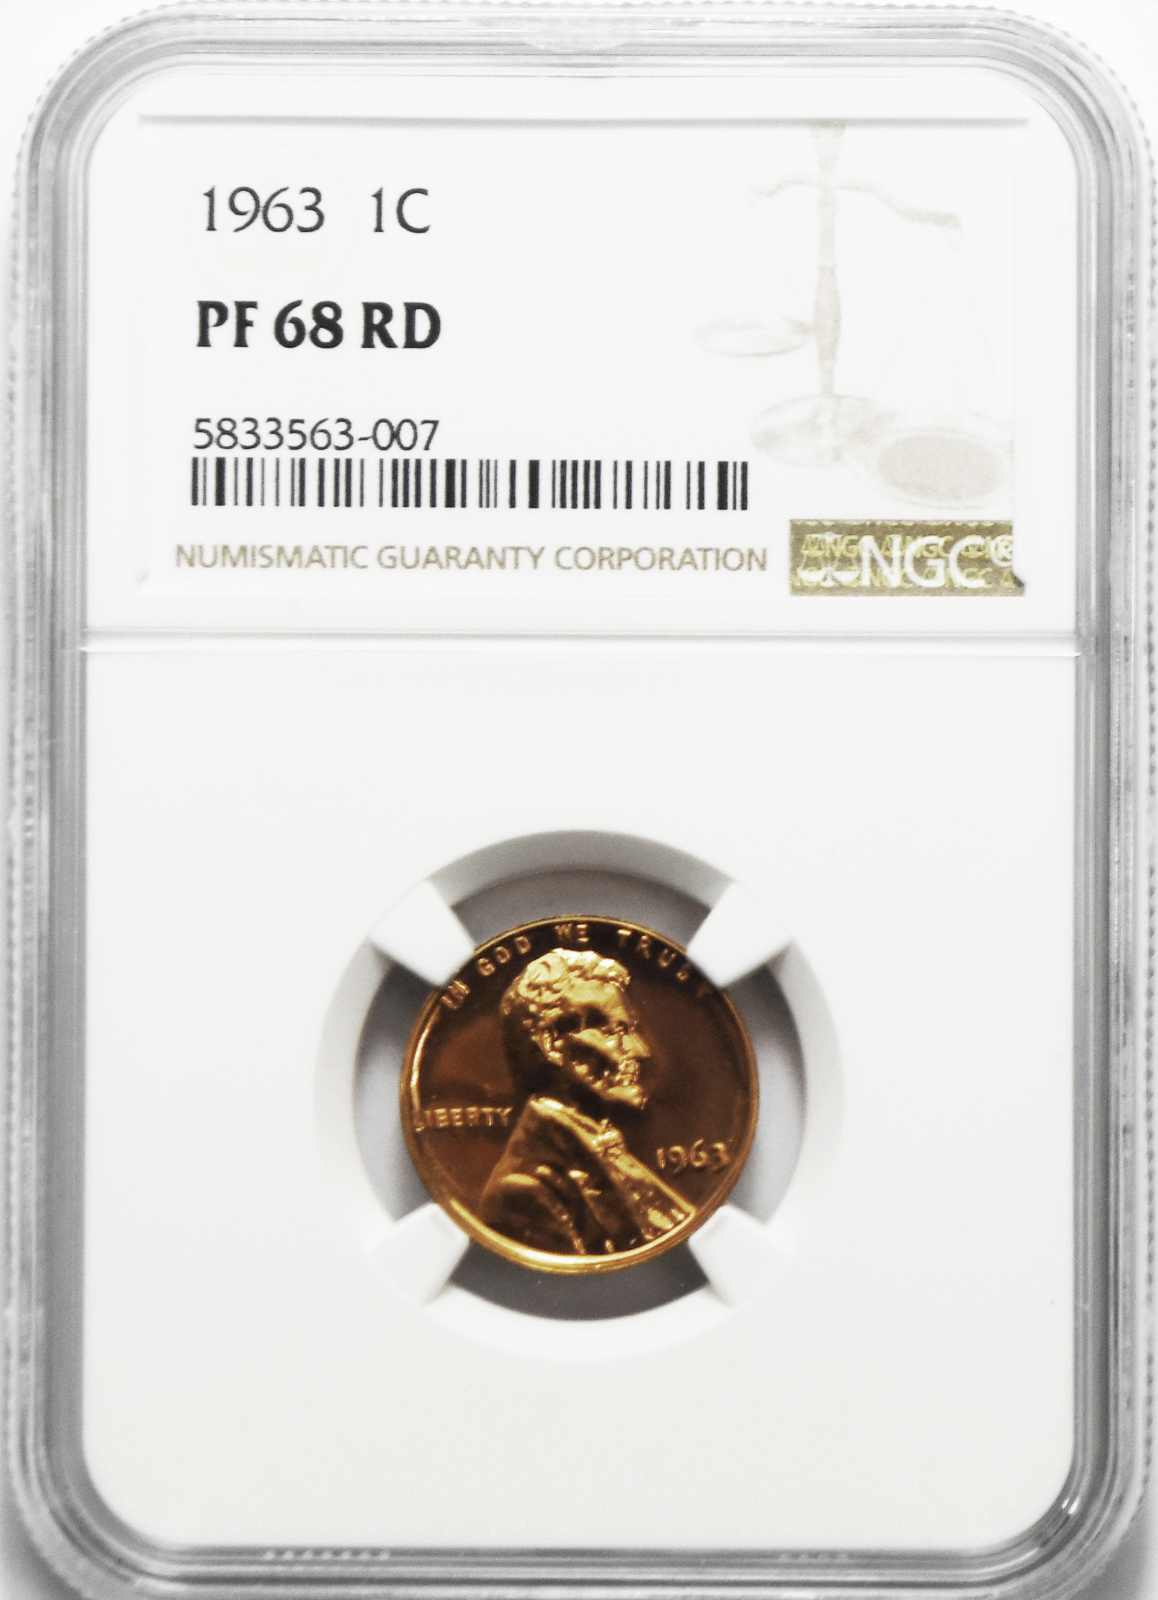 1963 1c Proof Lincoln Memorial Cent One Penny NGC PF68 RD Gem Uncirculated